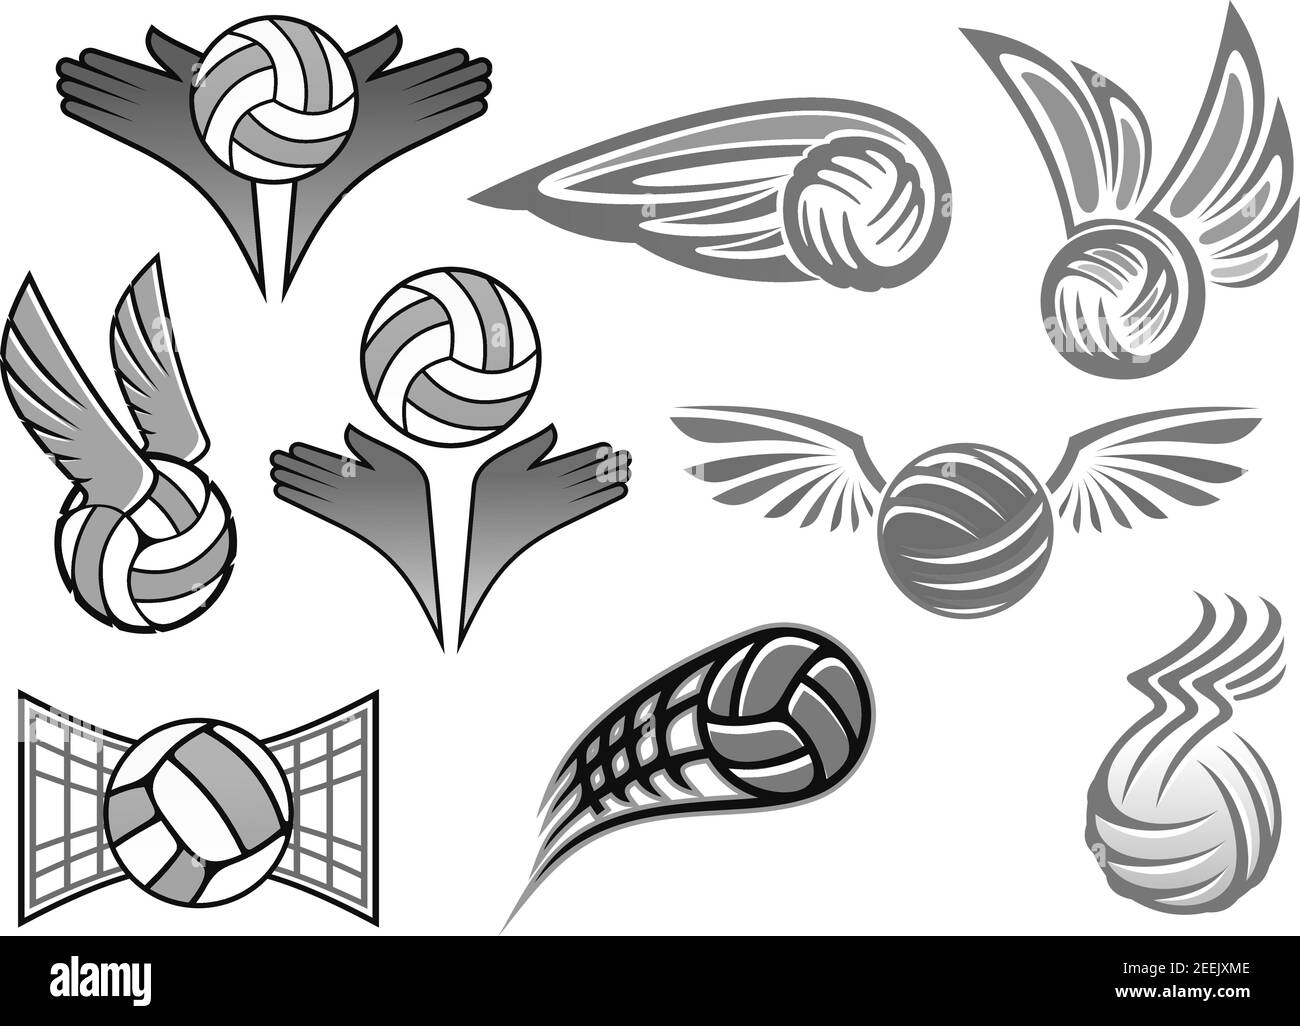 Balls vector icons set for sport club badge. Isolated symbols of flying ball on wings to goal gates and in hands. Design for volleyball, soccer footba Stock Vector